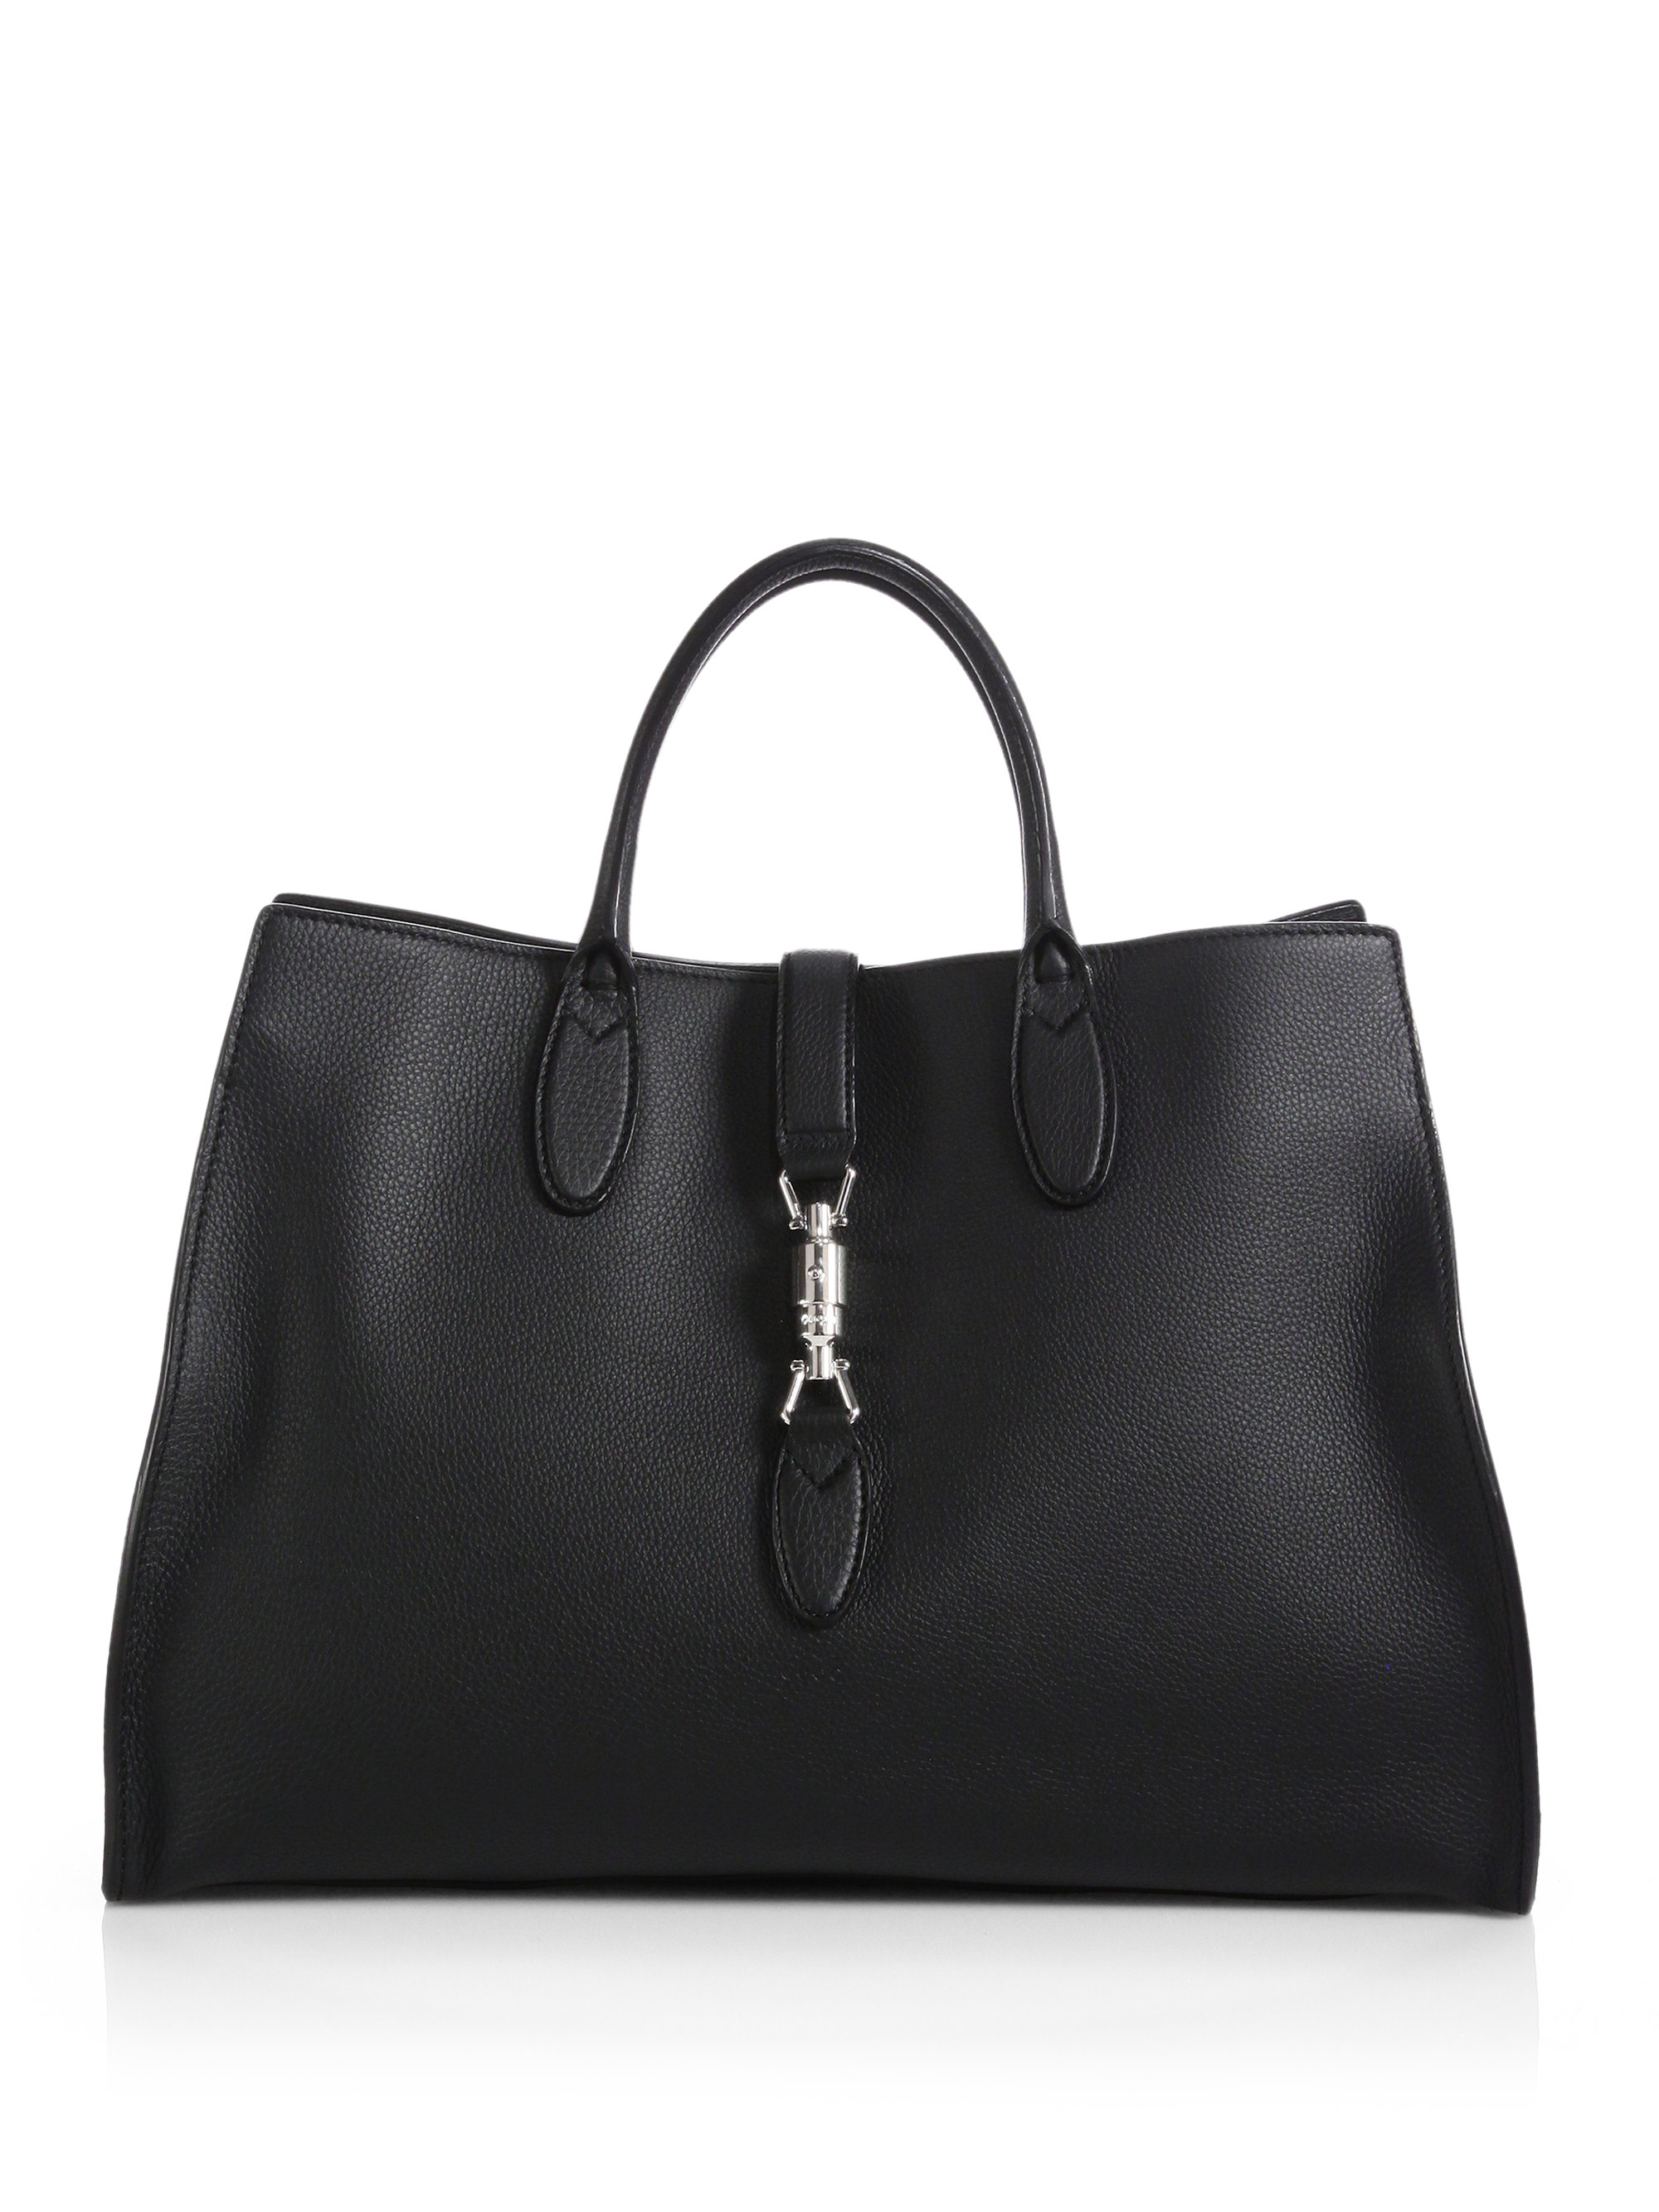 Lyst - Gucci Jackie Soft Leather Top Handle Bag in Black